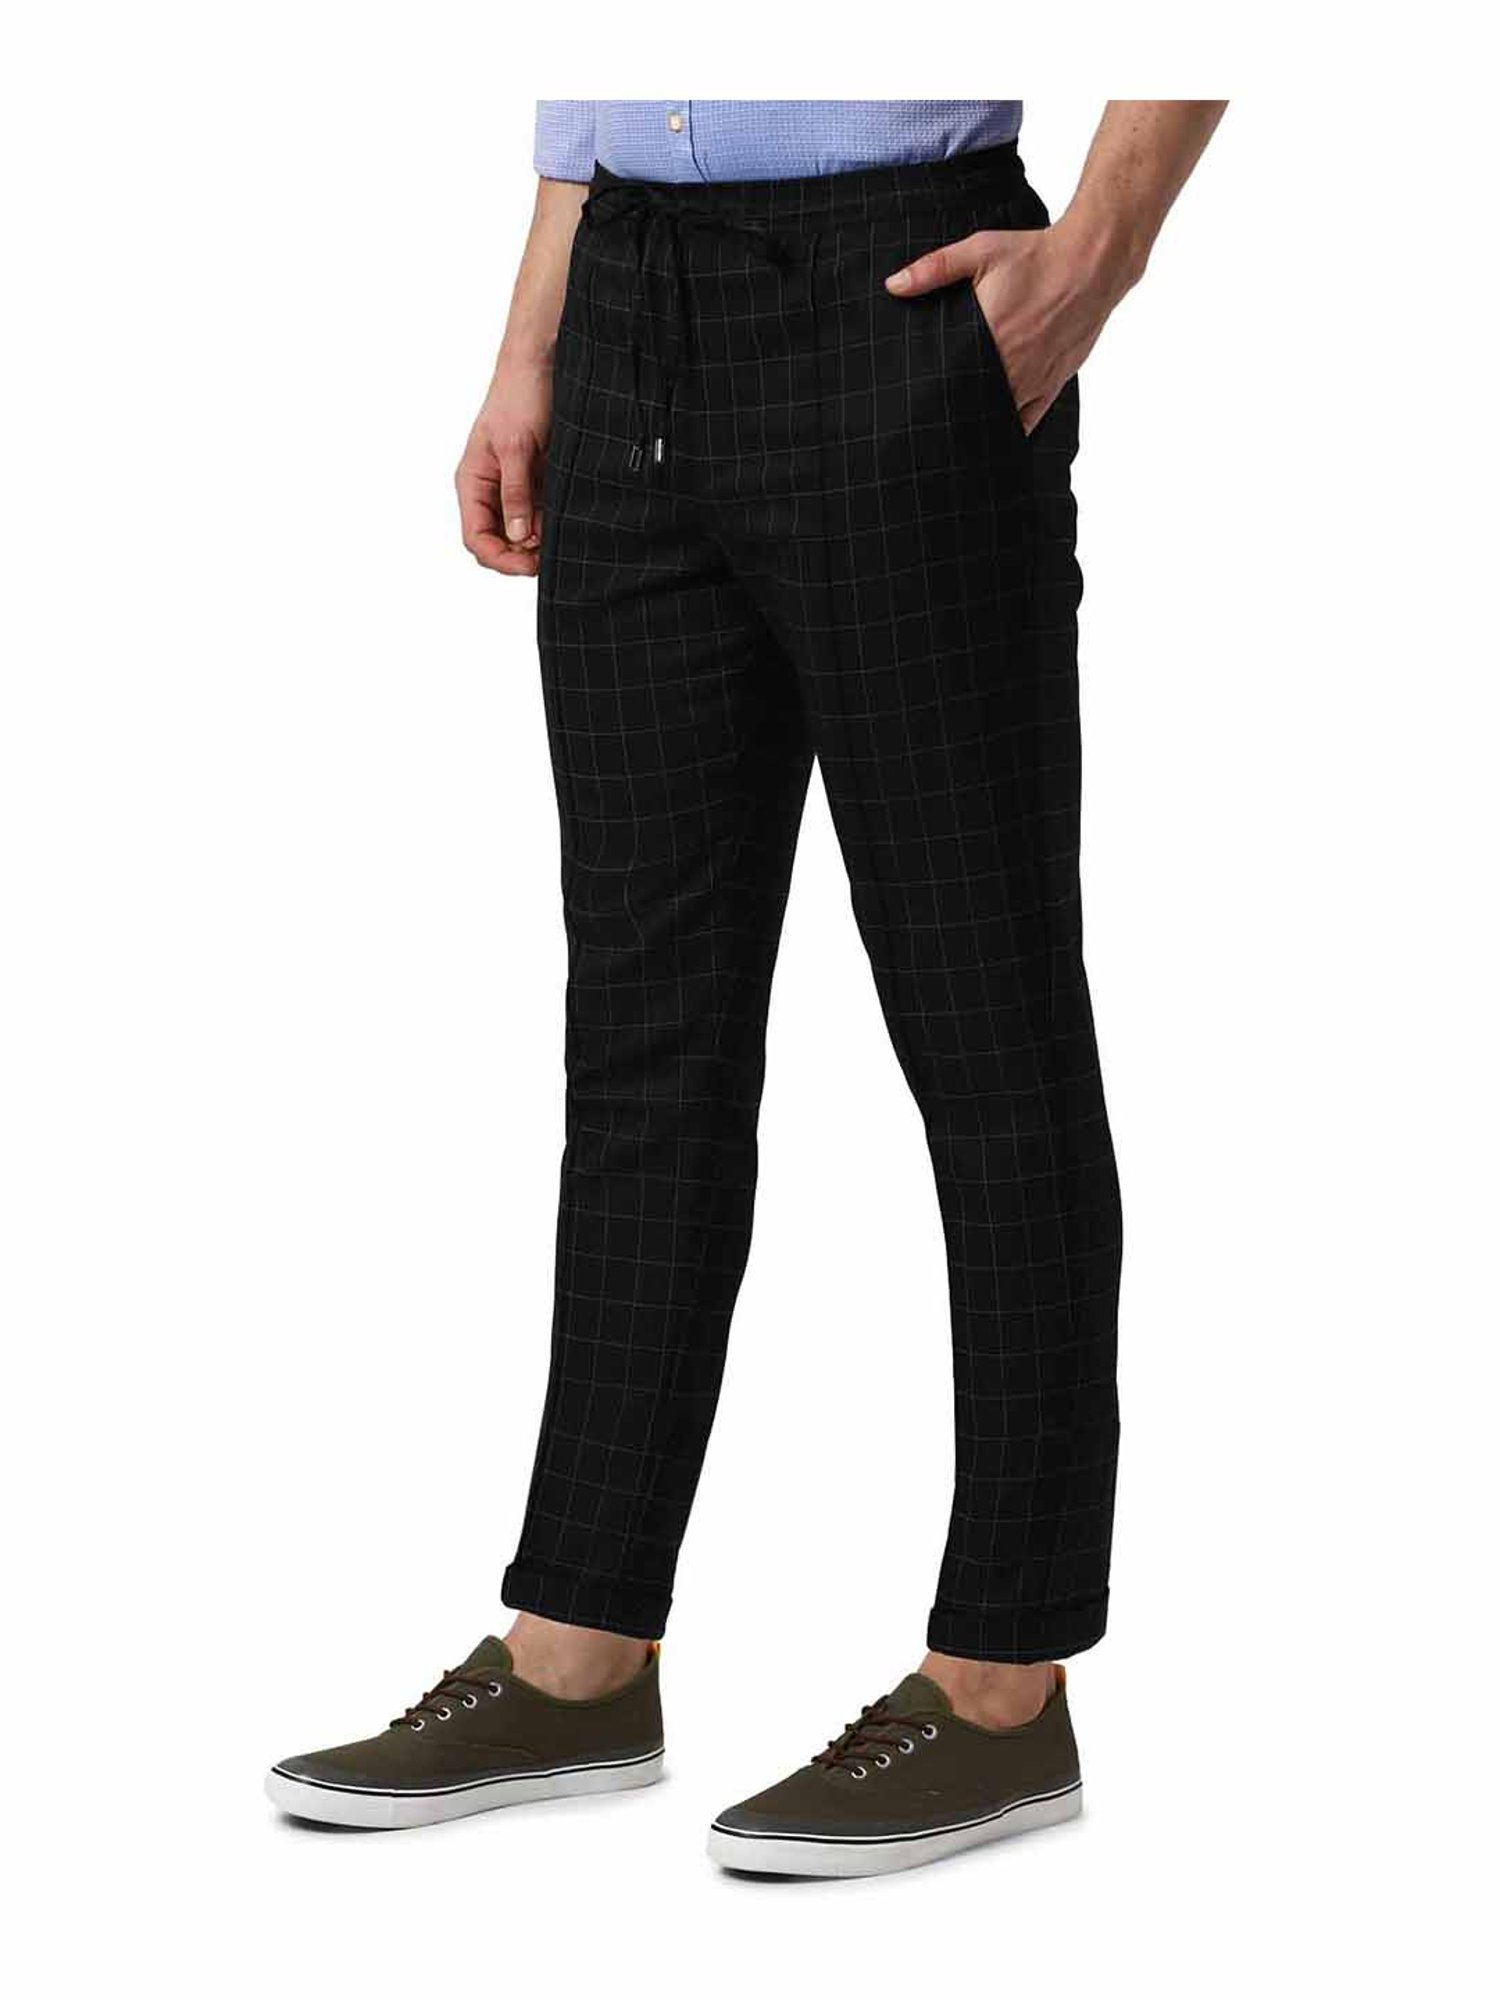 Buy Peter England Men Navy Solid Super Slim Fit Casual Trousers online